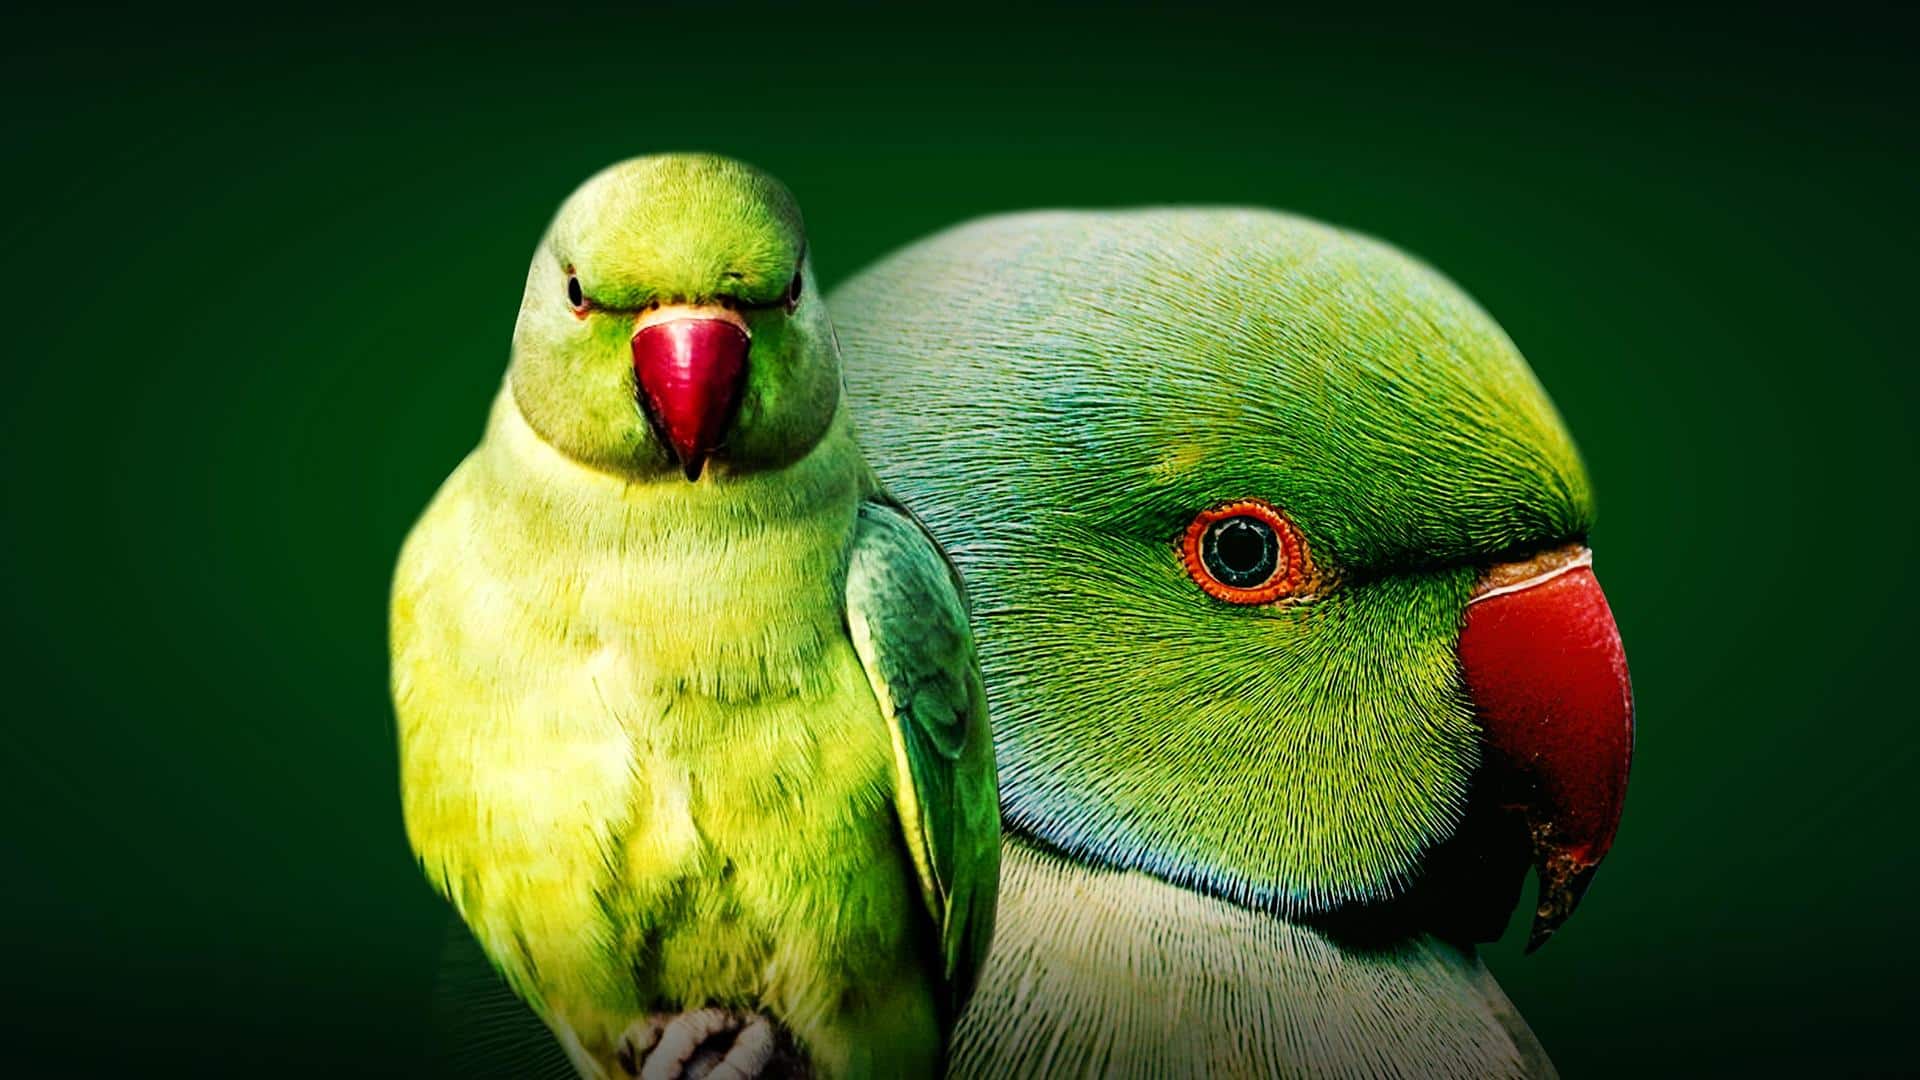 Love parrots? Here are 5 interesting facts you should know